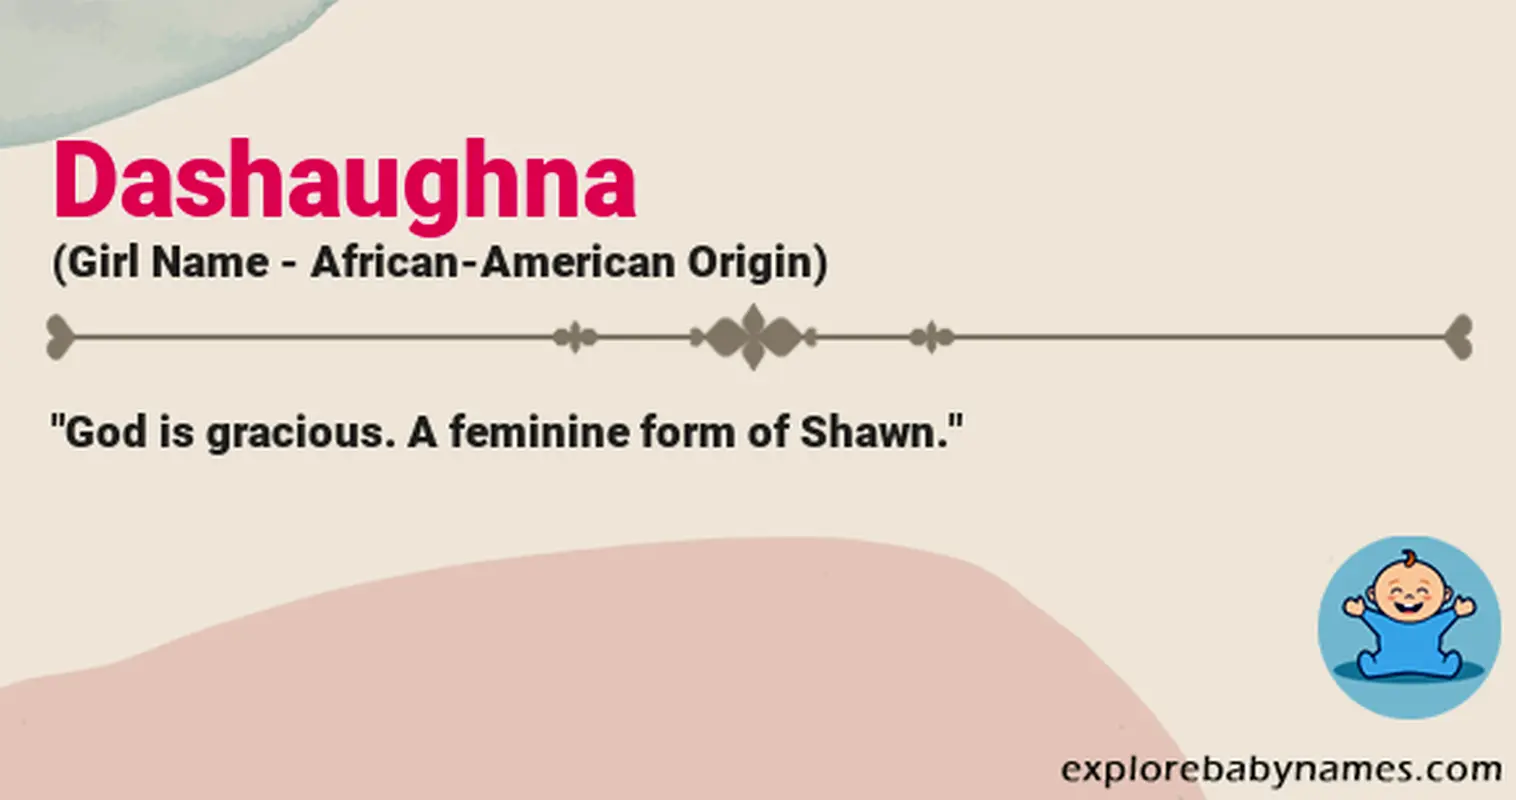 Meaning of Dashaughna